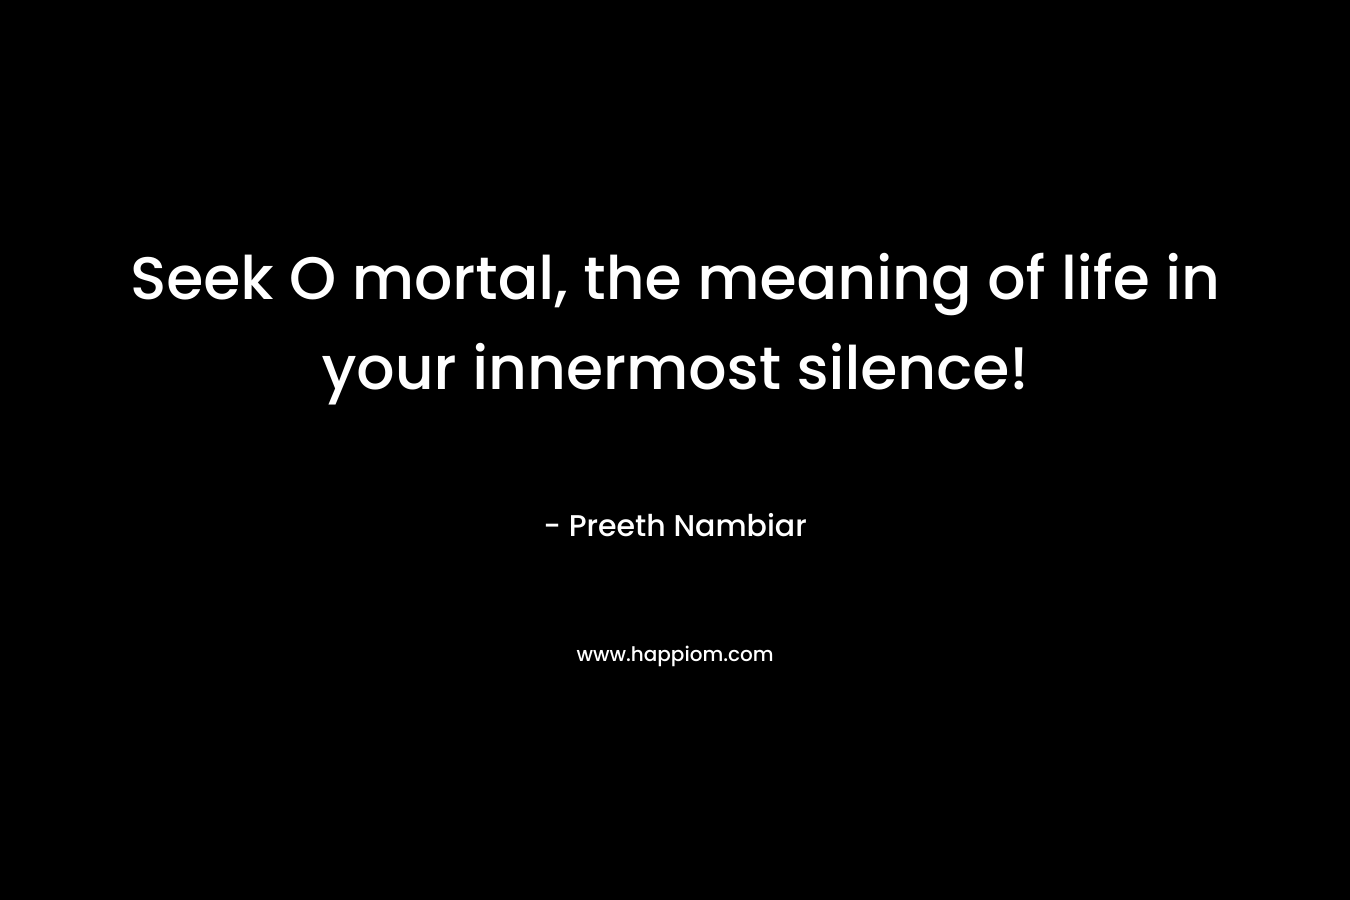 Seek O mortal, the meaning of life in your innermost silence! – Preeth Nambiar